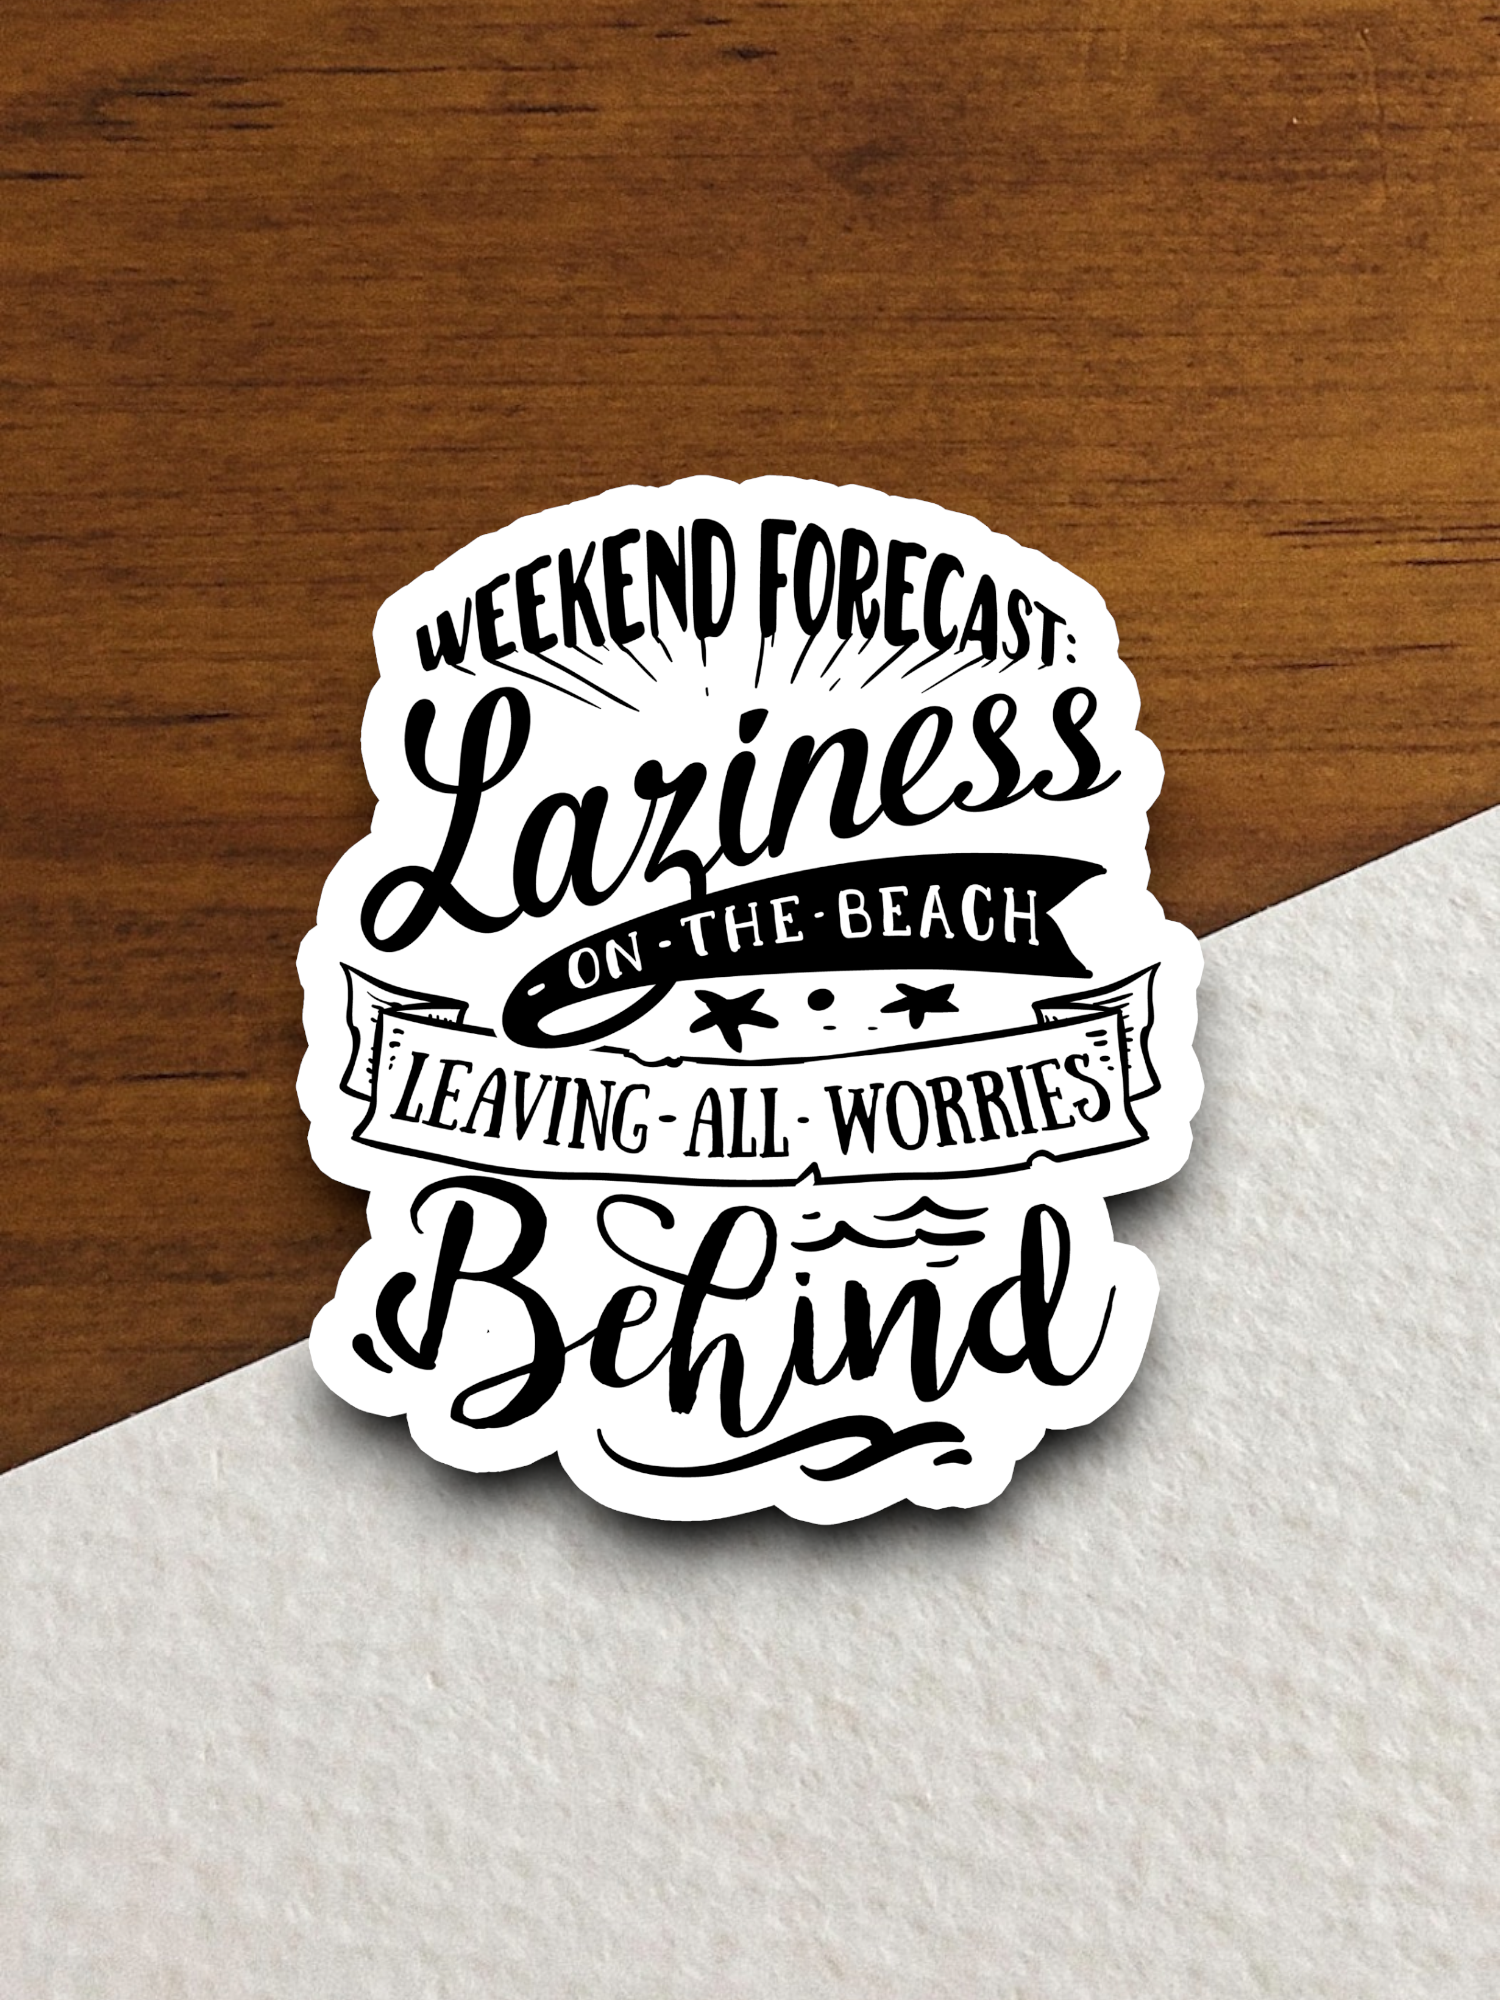 Laziness on the Beach Leaving All Worries Behind Travel Sticker